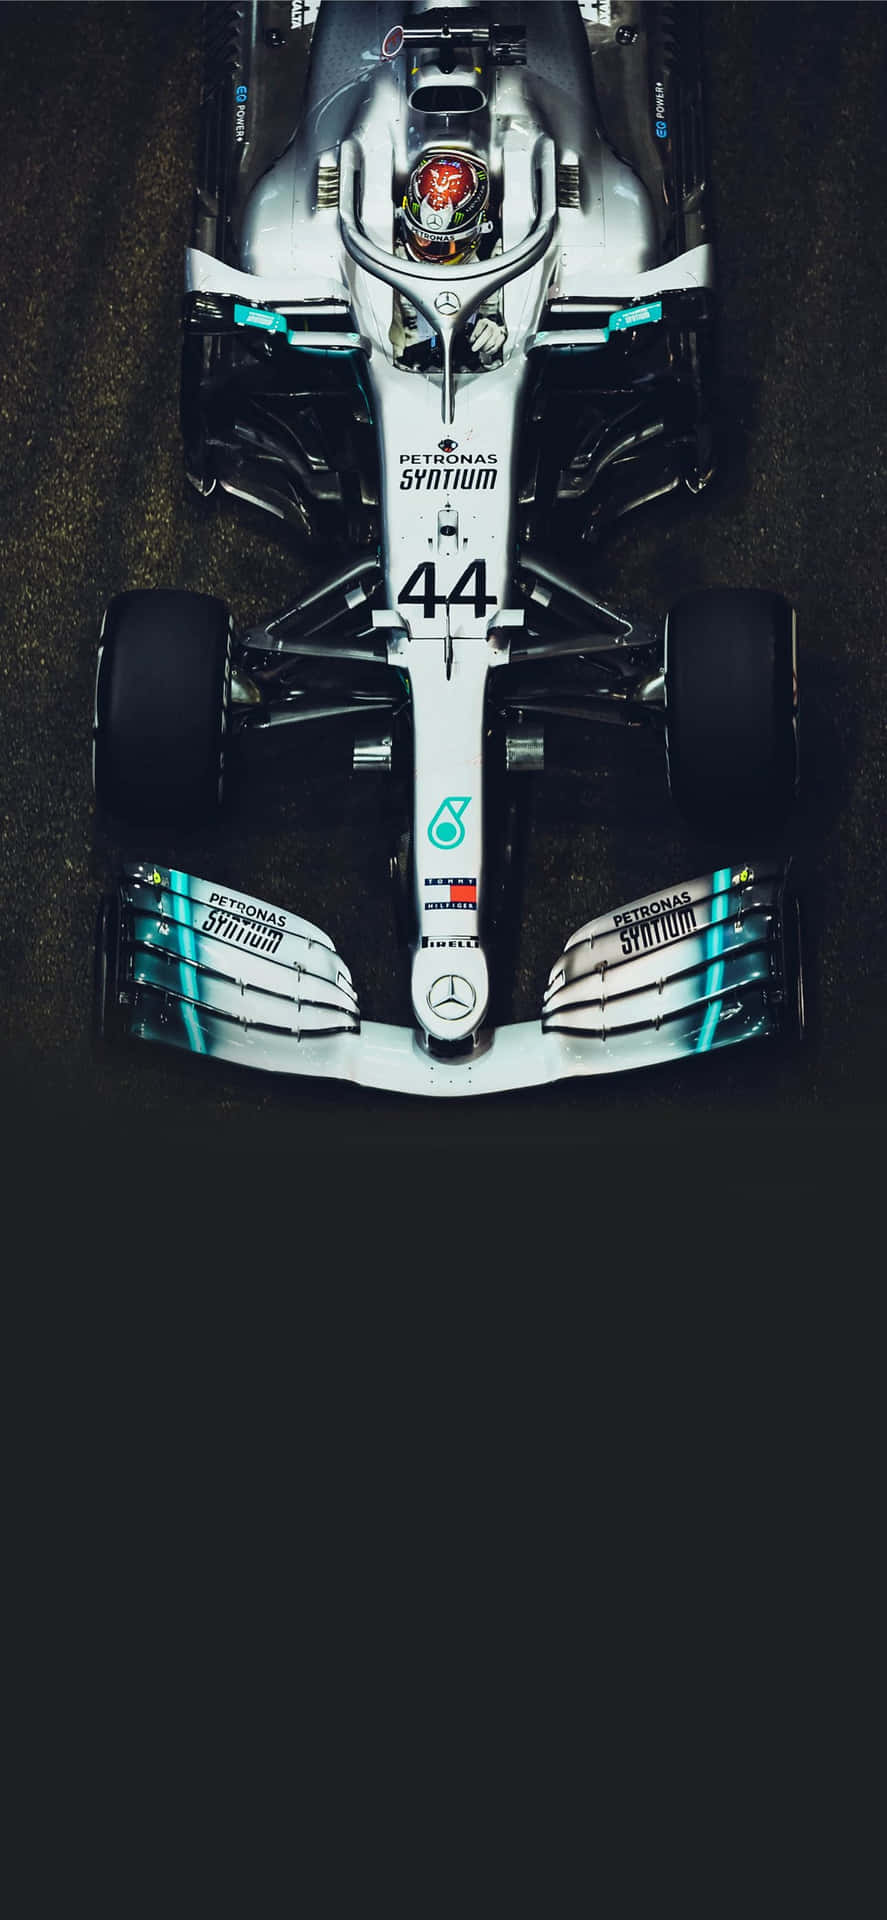 Appreciating the excellence of Formula 1 on your iPhone Wallpaper